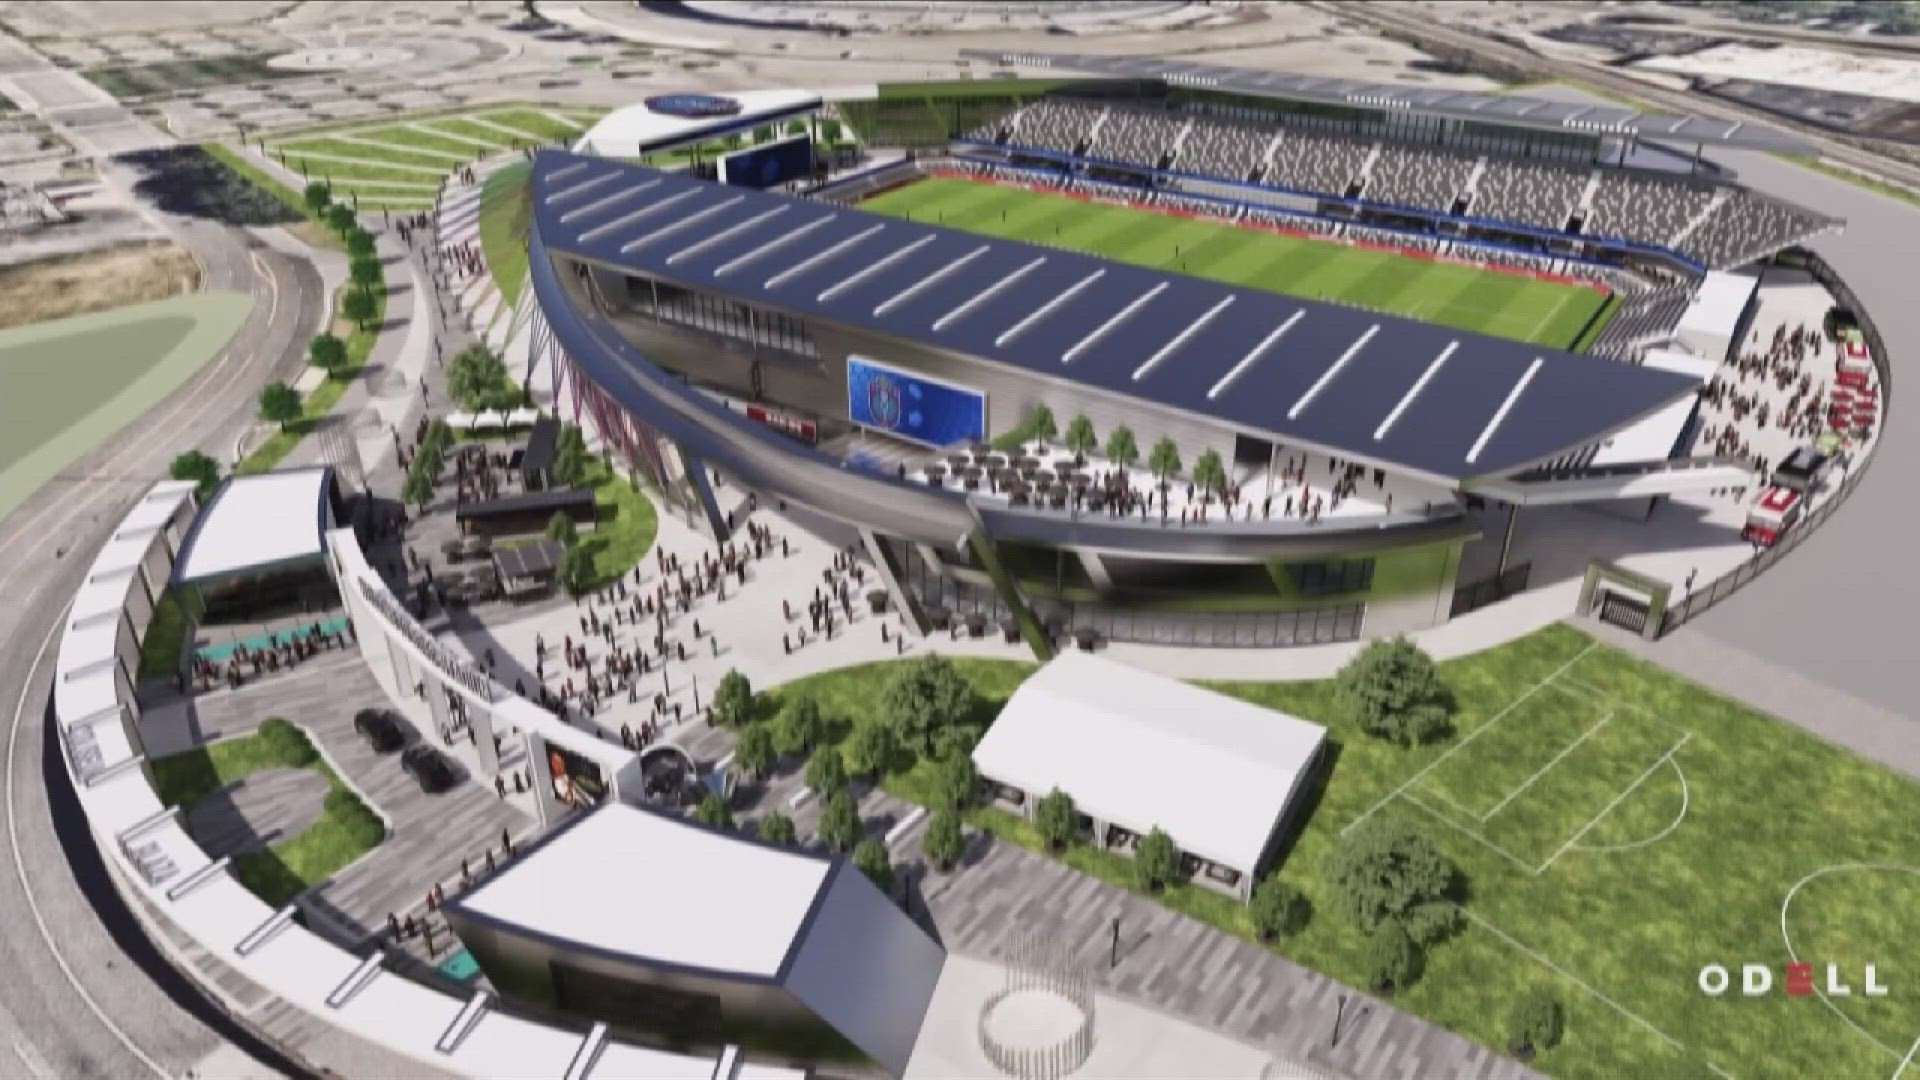 The city is also proposing to transfer the stadium’s ownership to the University of Memphis Auxiliary Services Foundation.